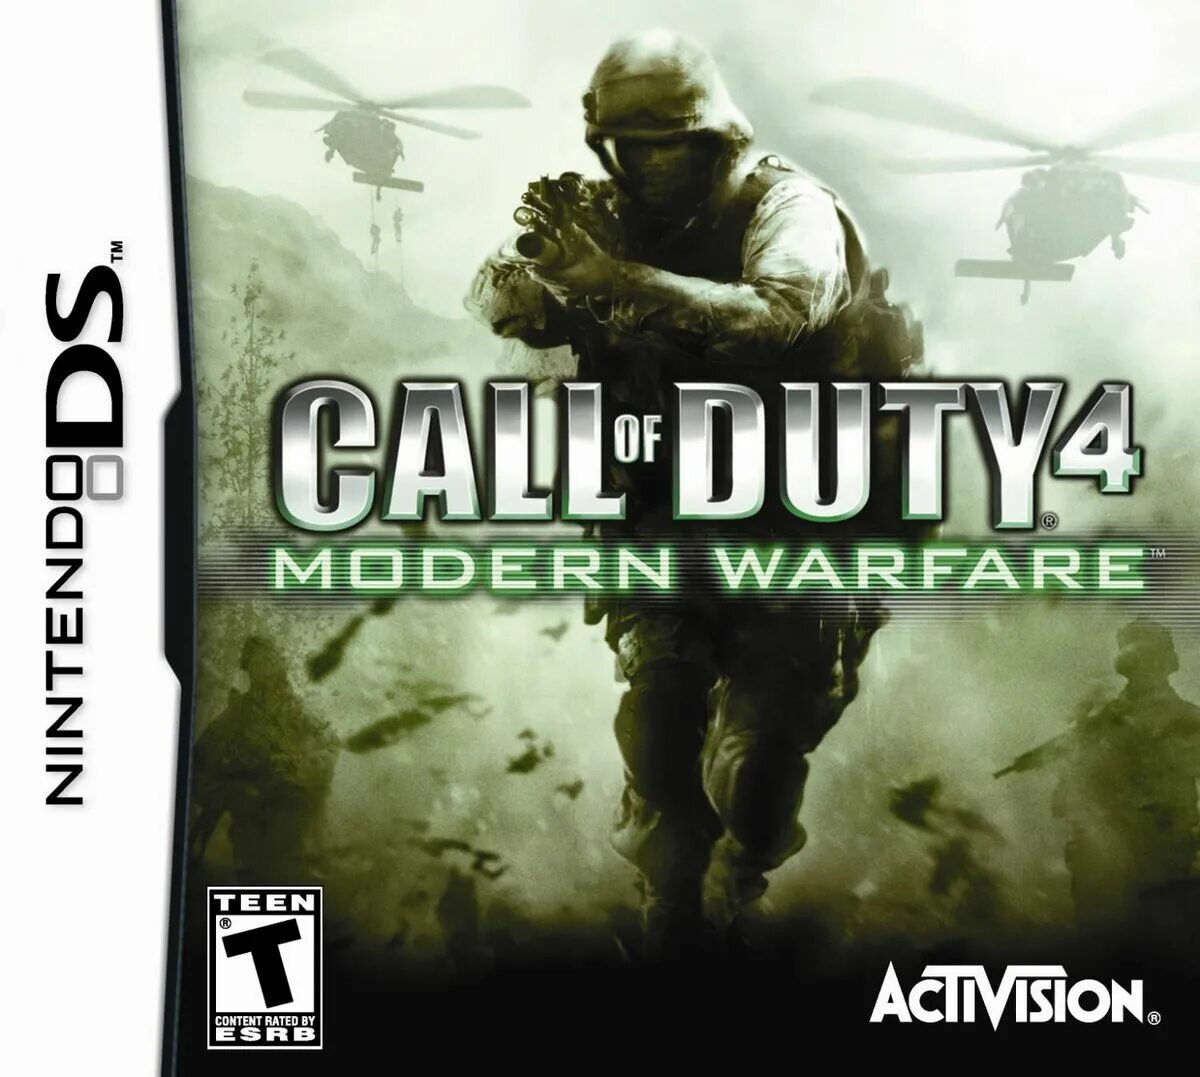 Call of duty 4 nintendo ds. Call of Duty 2: Modern Warfare (Nintendo DS). Call of Duty Modern Warfare Nintendo DS. Call of Duty 4: Modern Warfare (Nintendo DS) Чернобыля. Call of Duty Modern Warfare 2 Xbox 360.